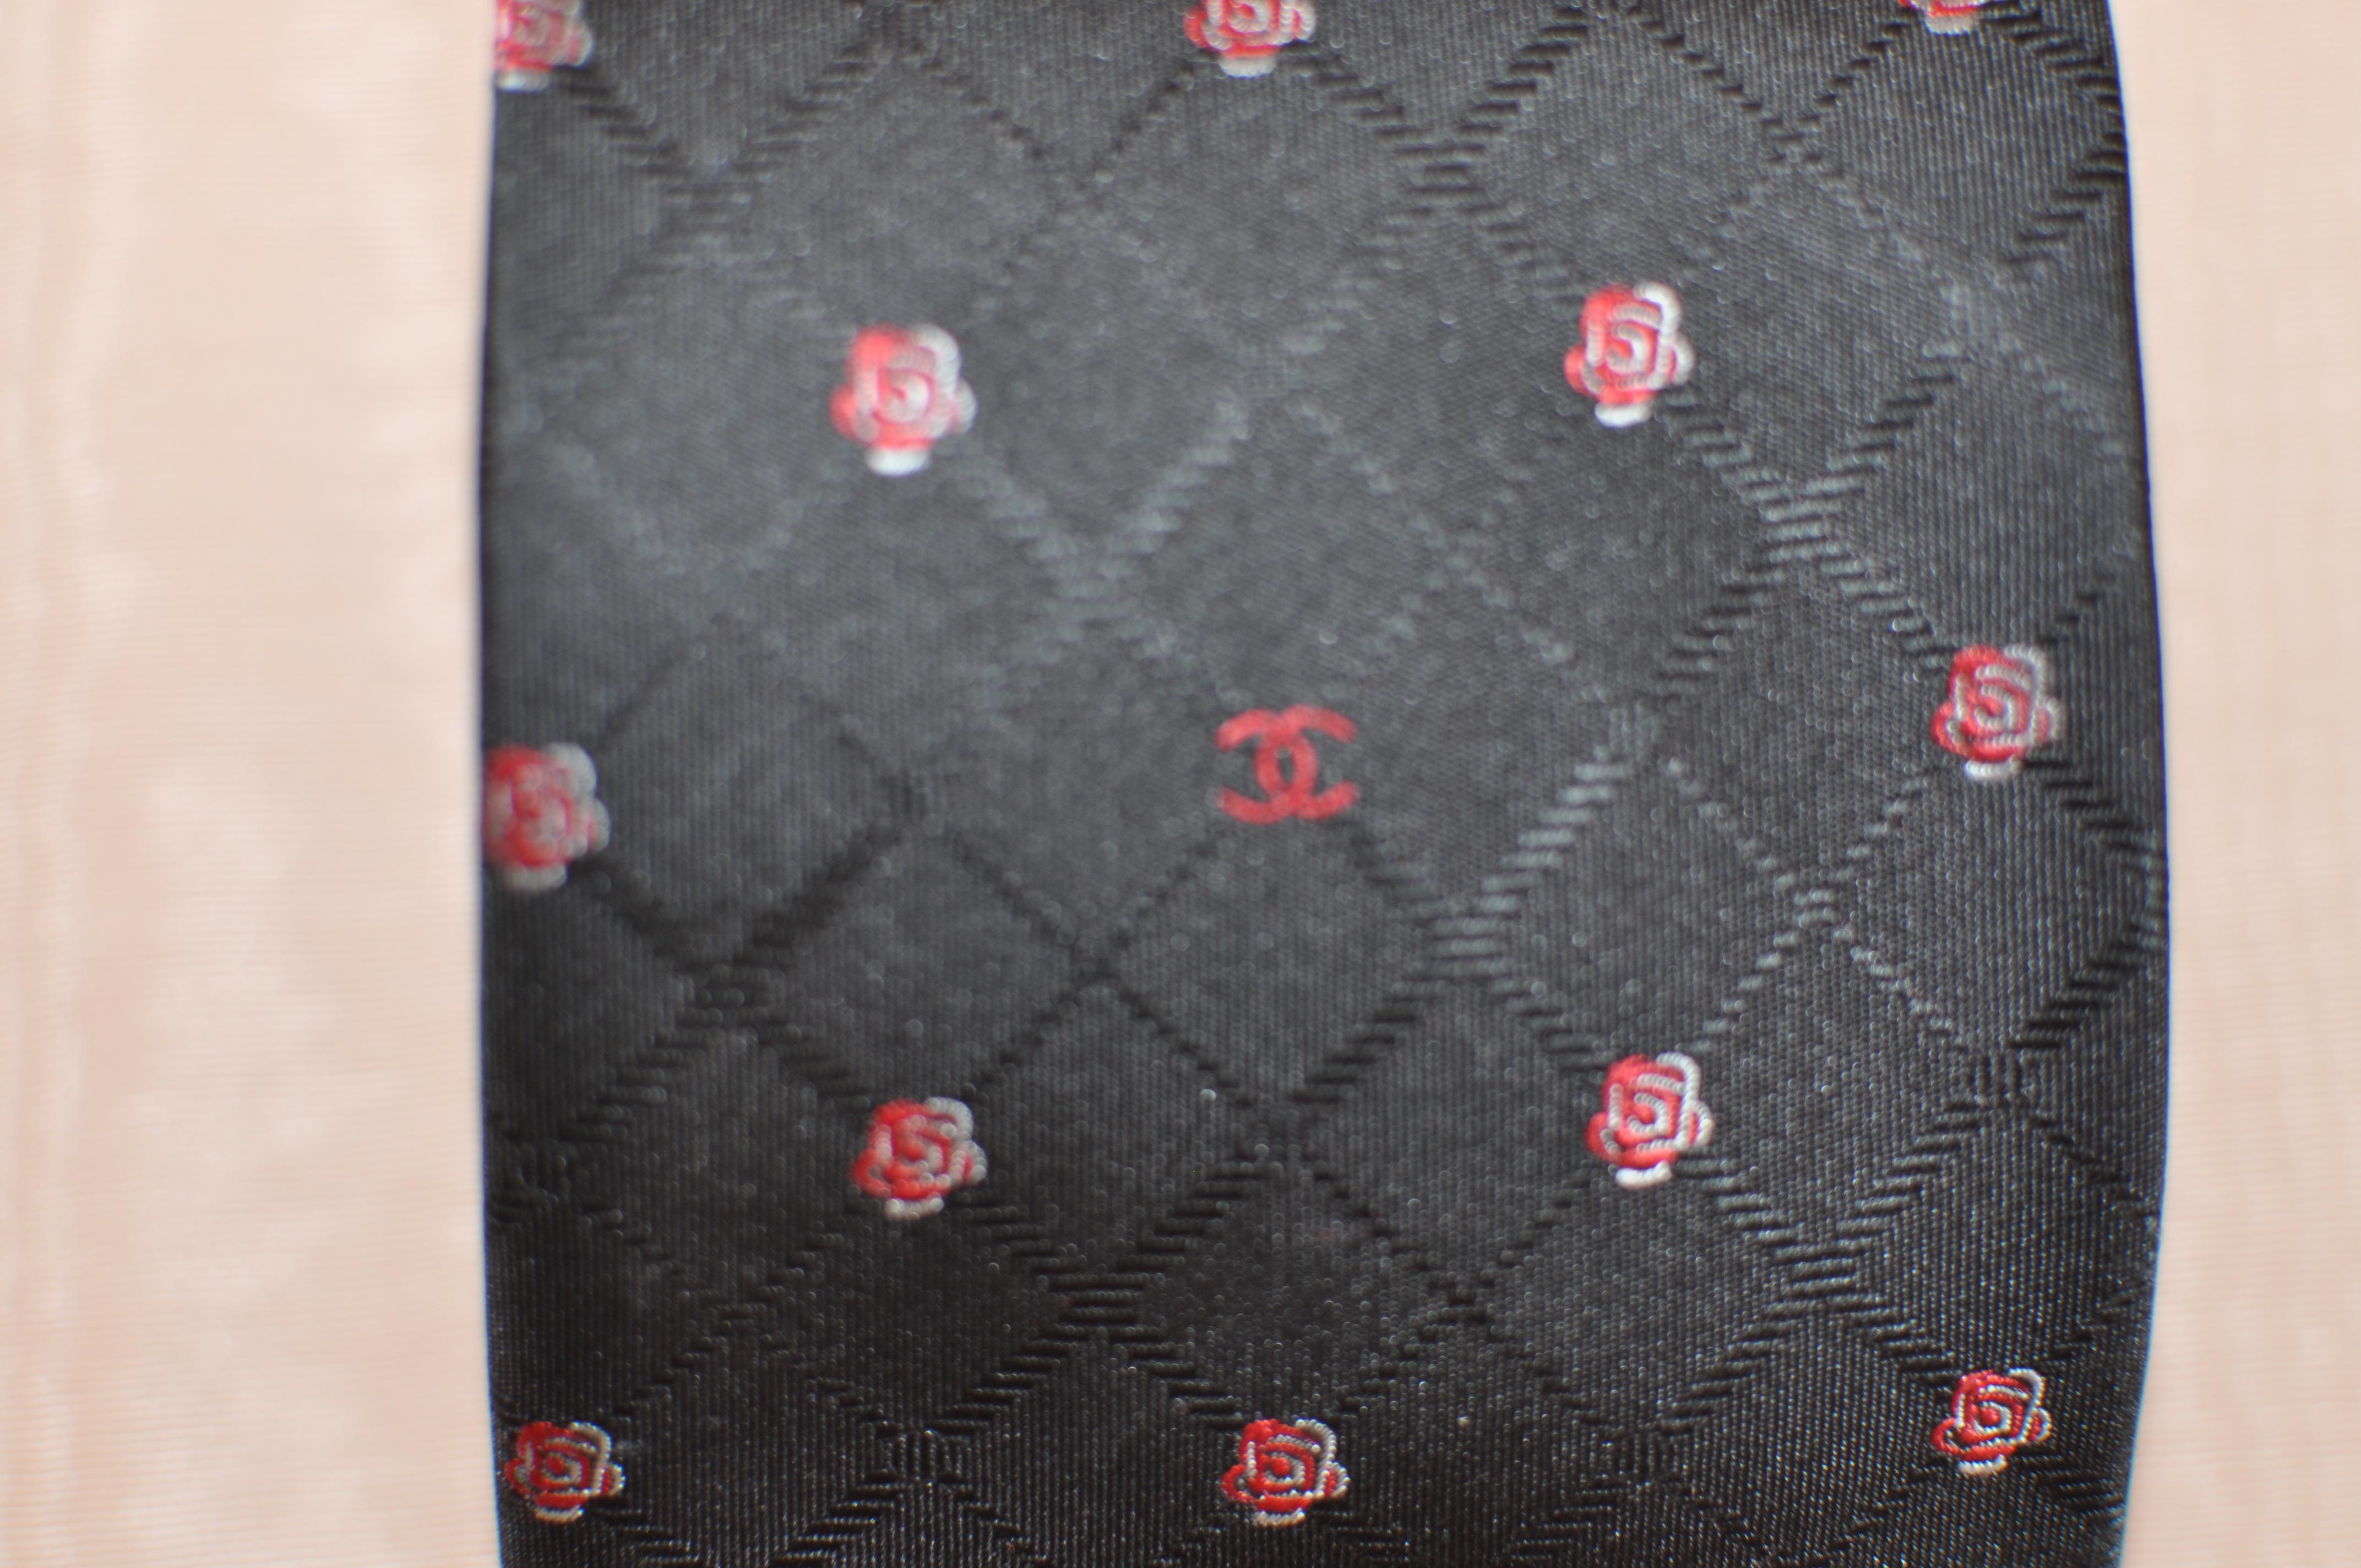 This tie has a black criss cross background with a nice white and red camellia print interspersed with the Chanel logo.